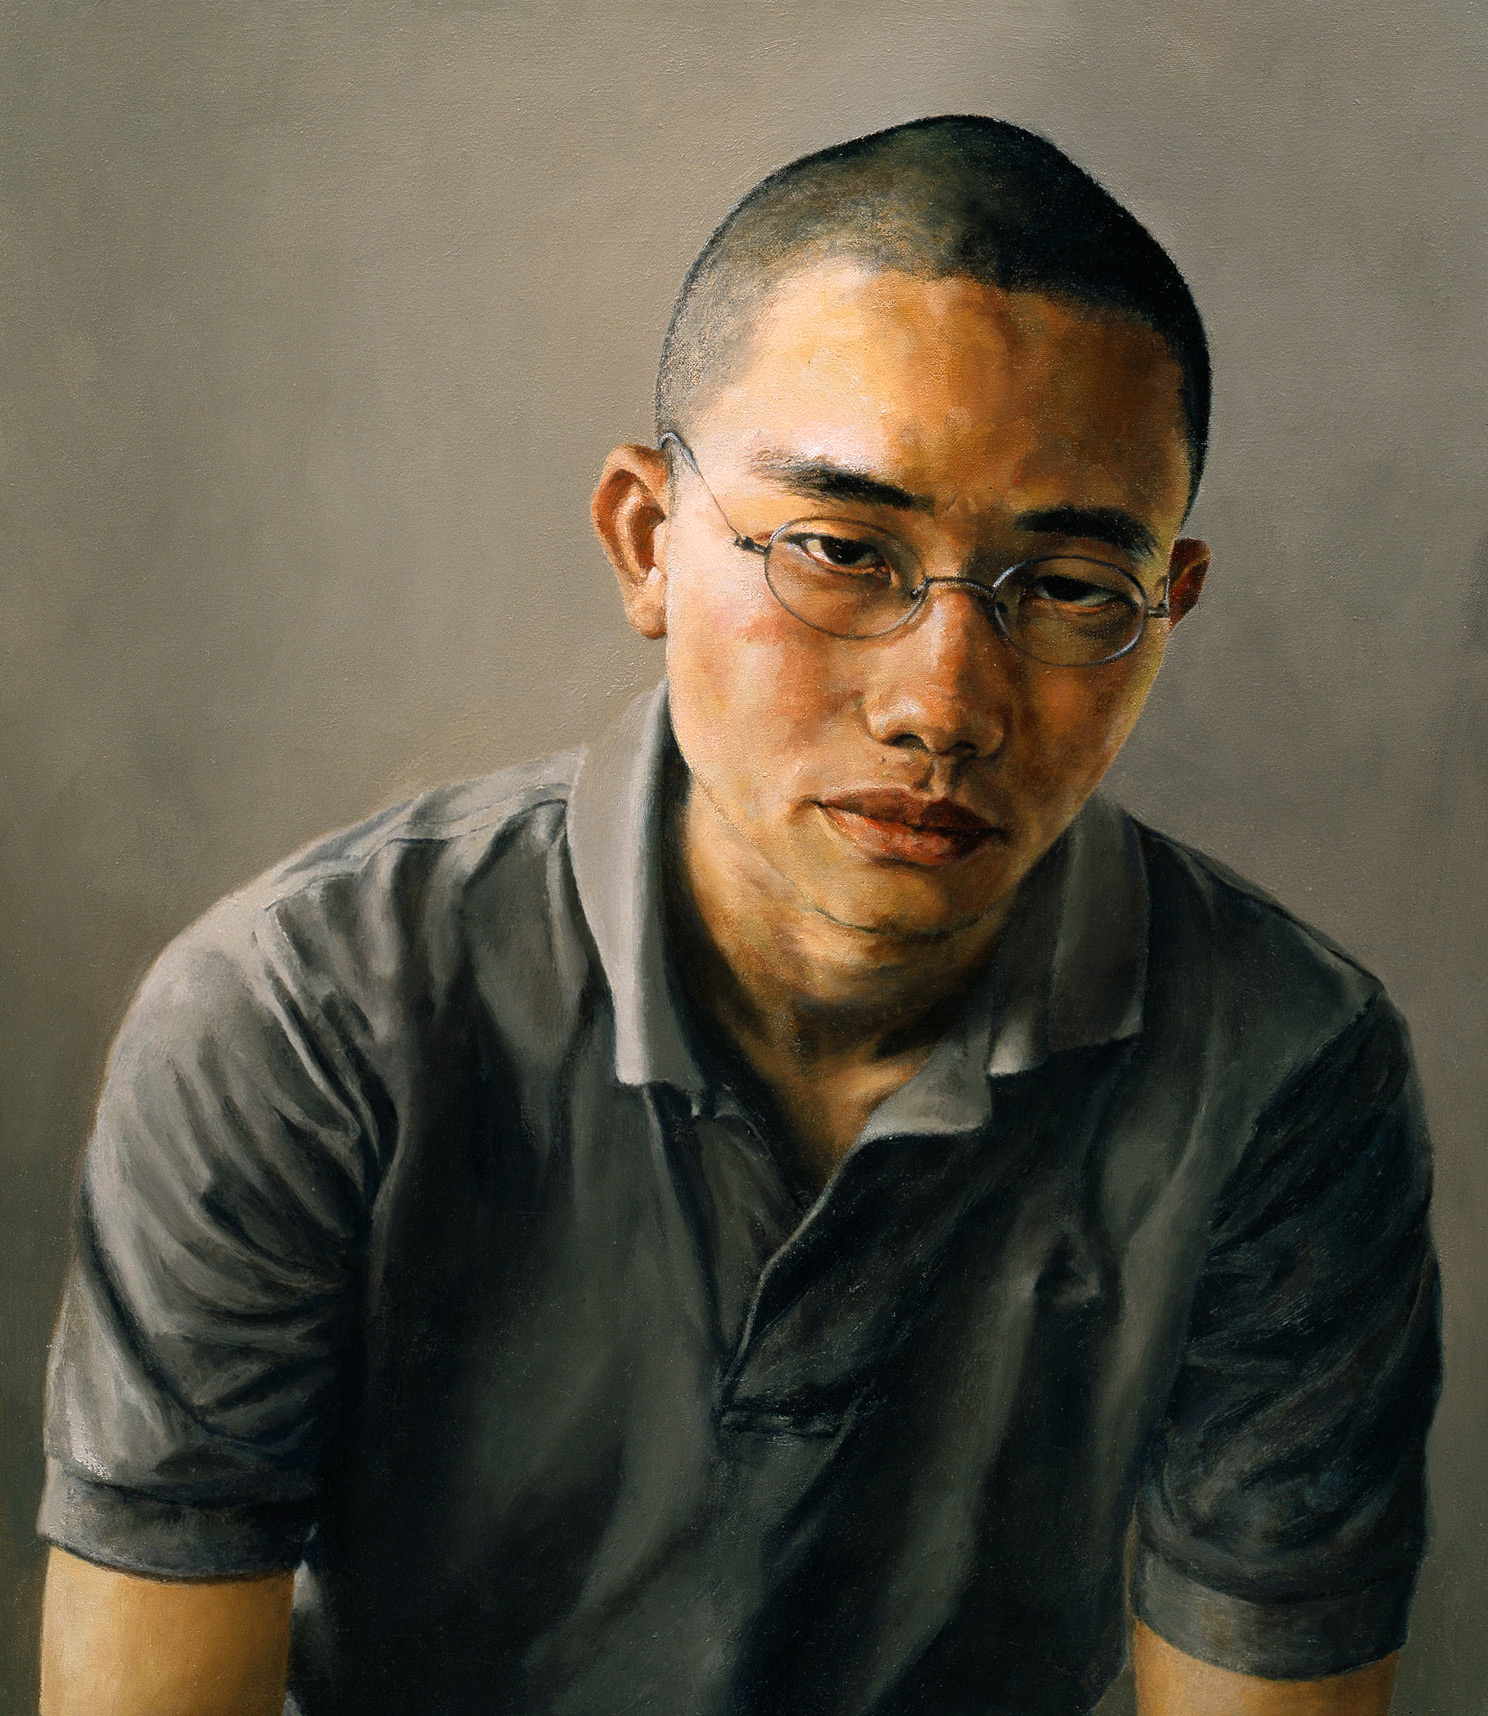   Reuben, You Have My Ear: Portrait of Reuben Liew Yoon Sing , Oil on Canvas, 2001, 24" x 21" 